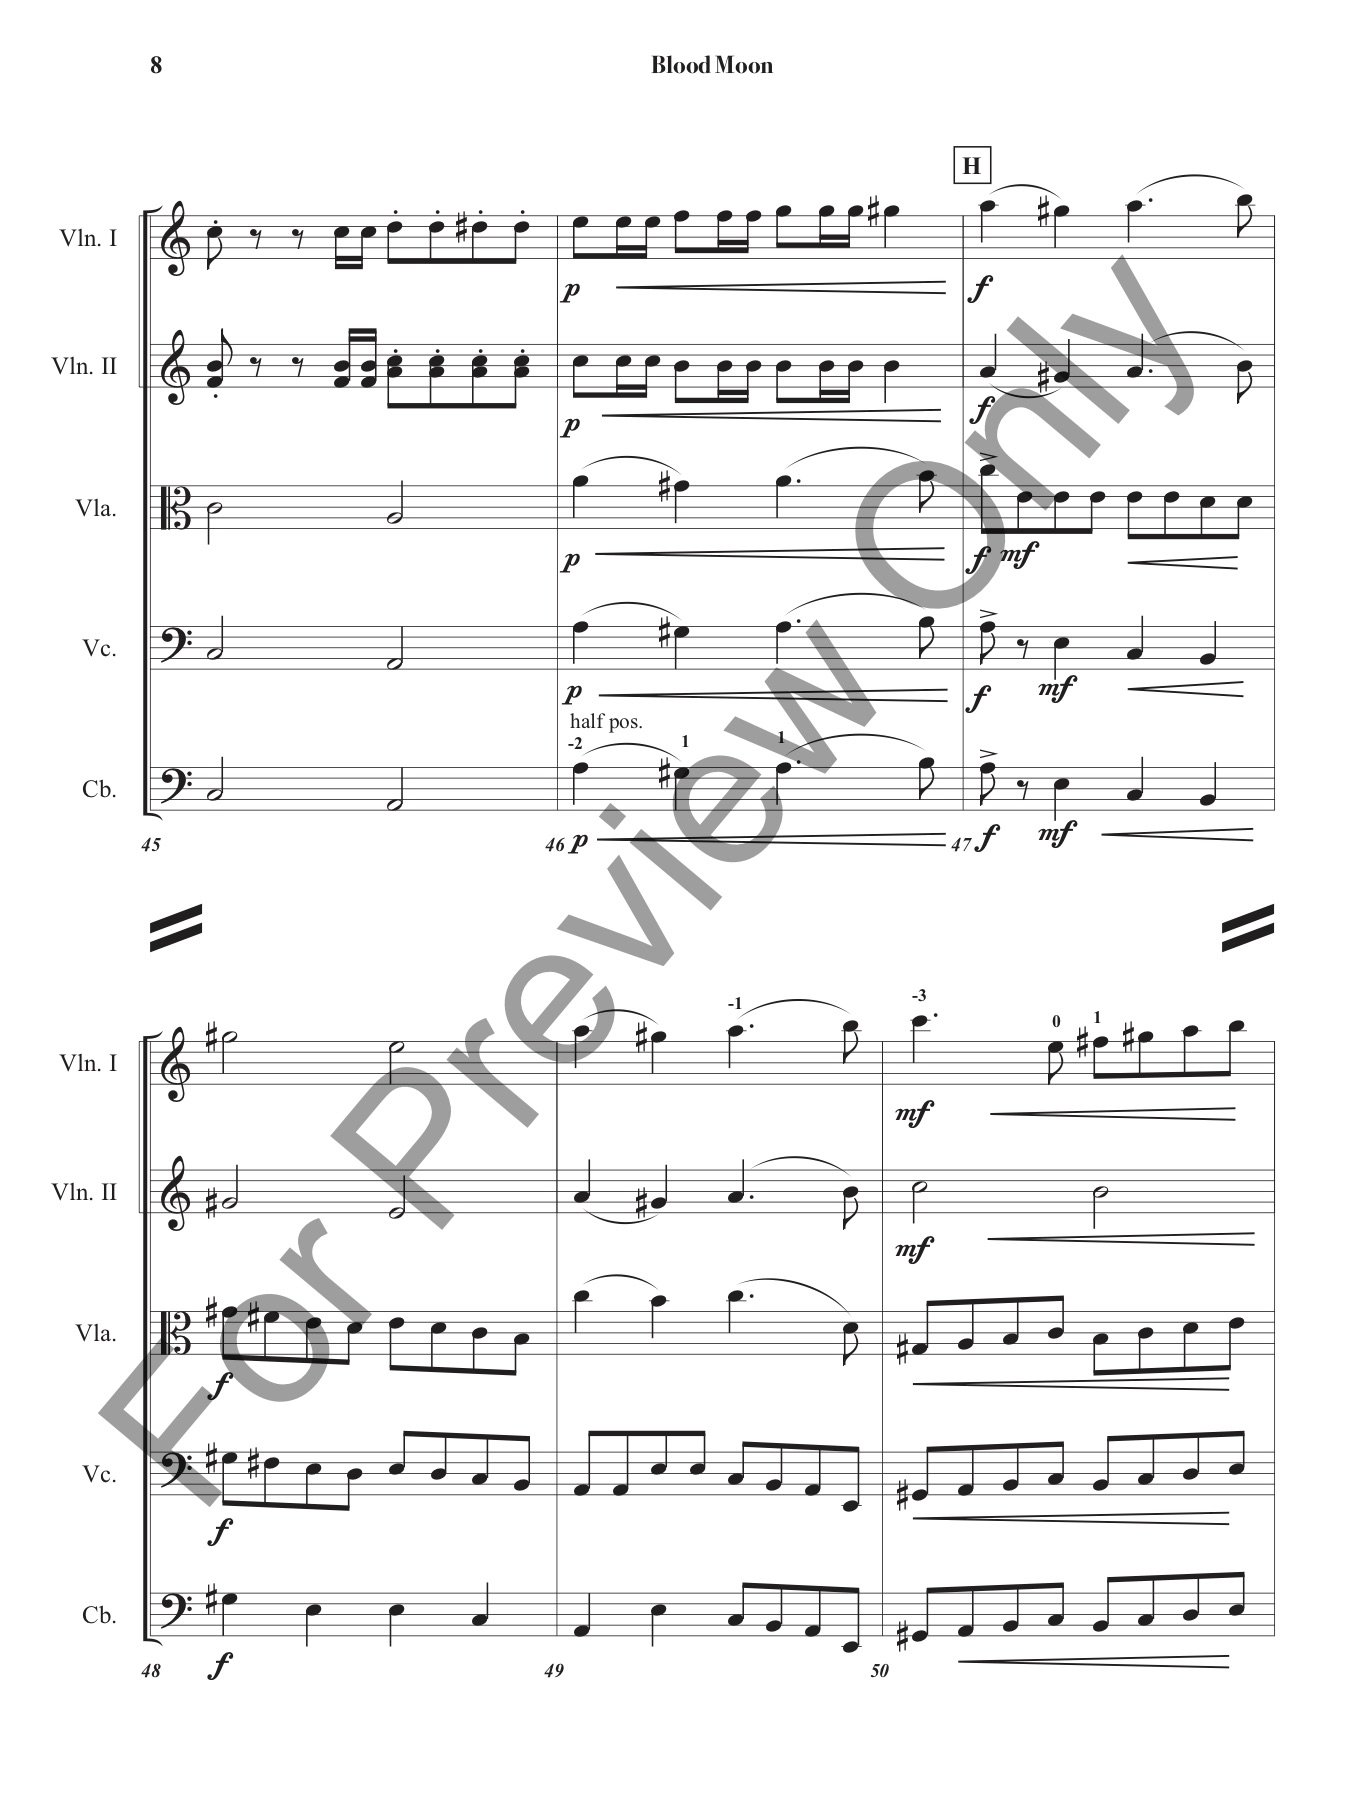 Blood Moon for String Orchestra - Cover Page and Full Score Only (for Preview Only p10).jpg